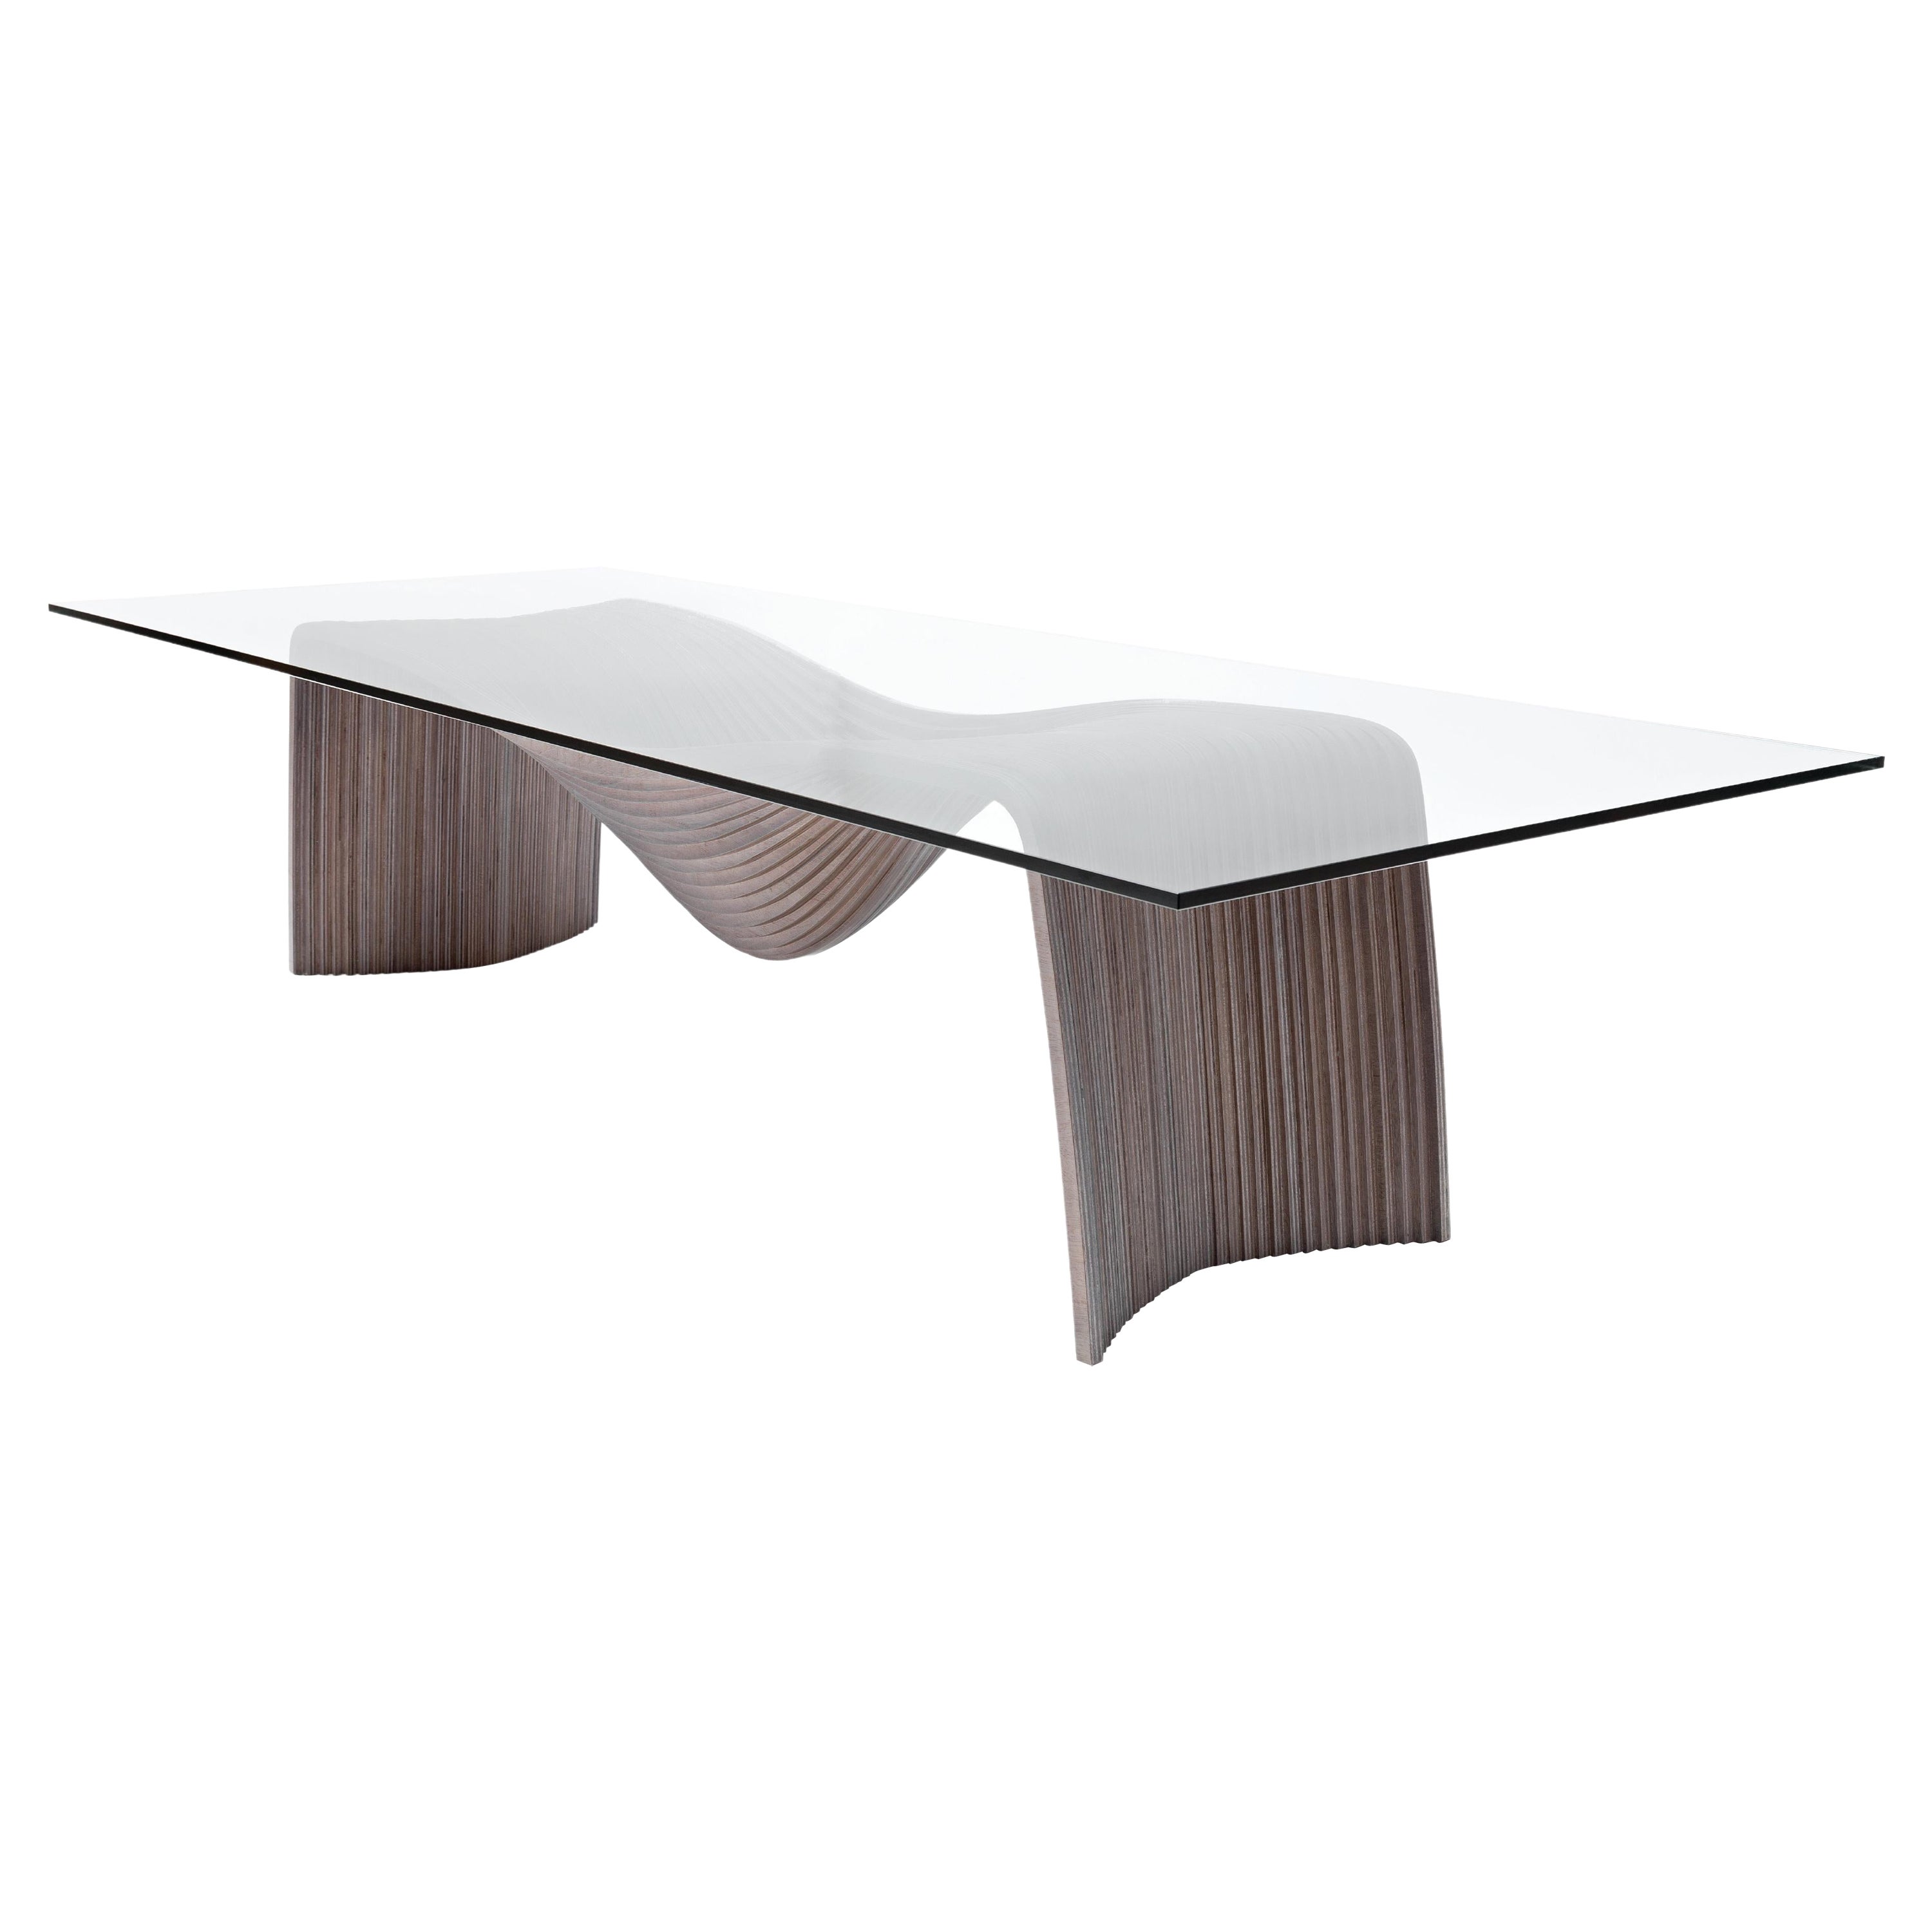 Corozo Table X Large by Piegatto, a Sculptural Contemporary Table For Sale